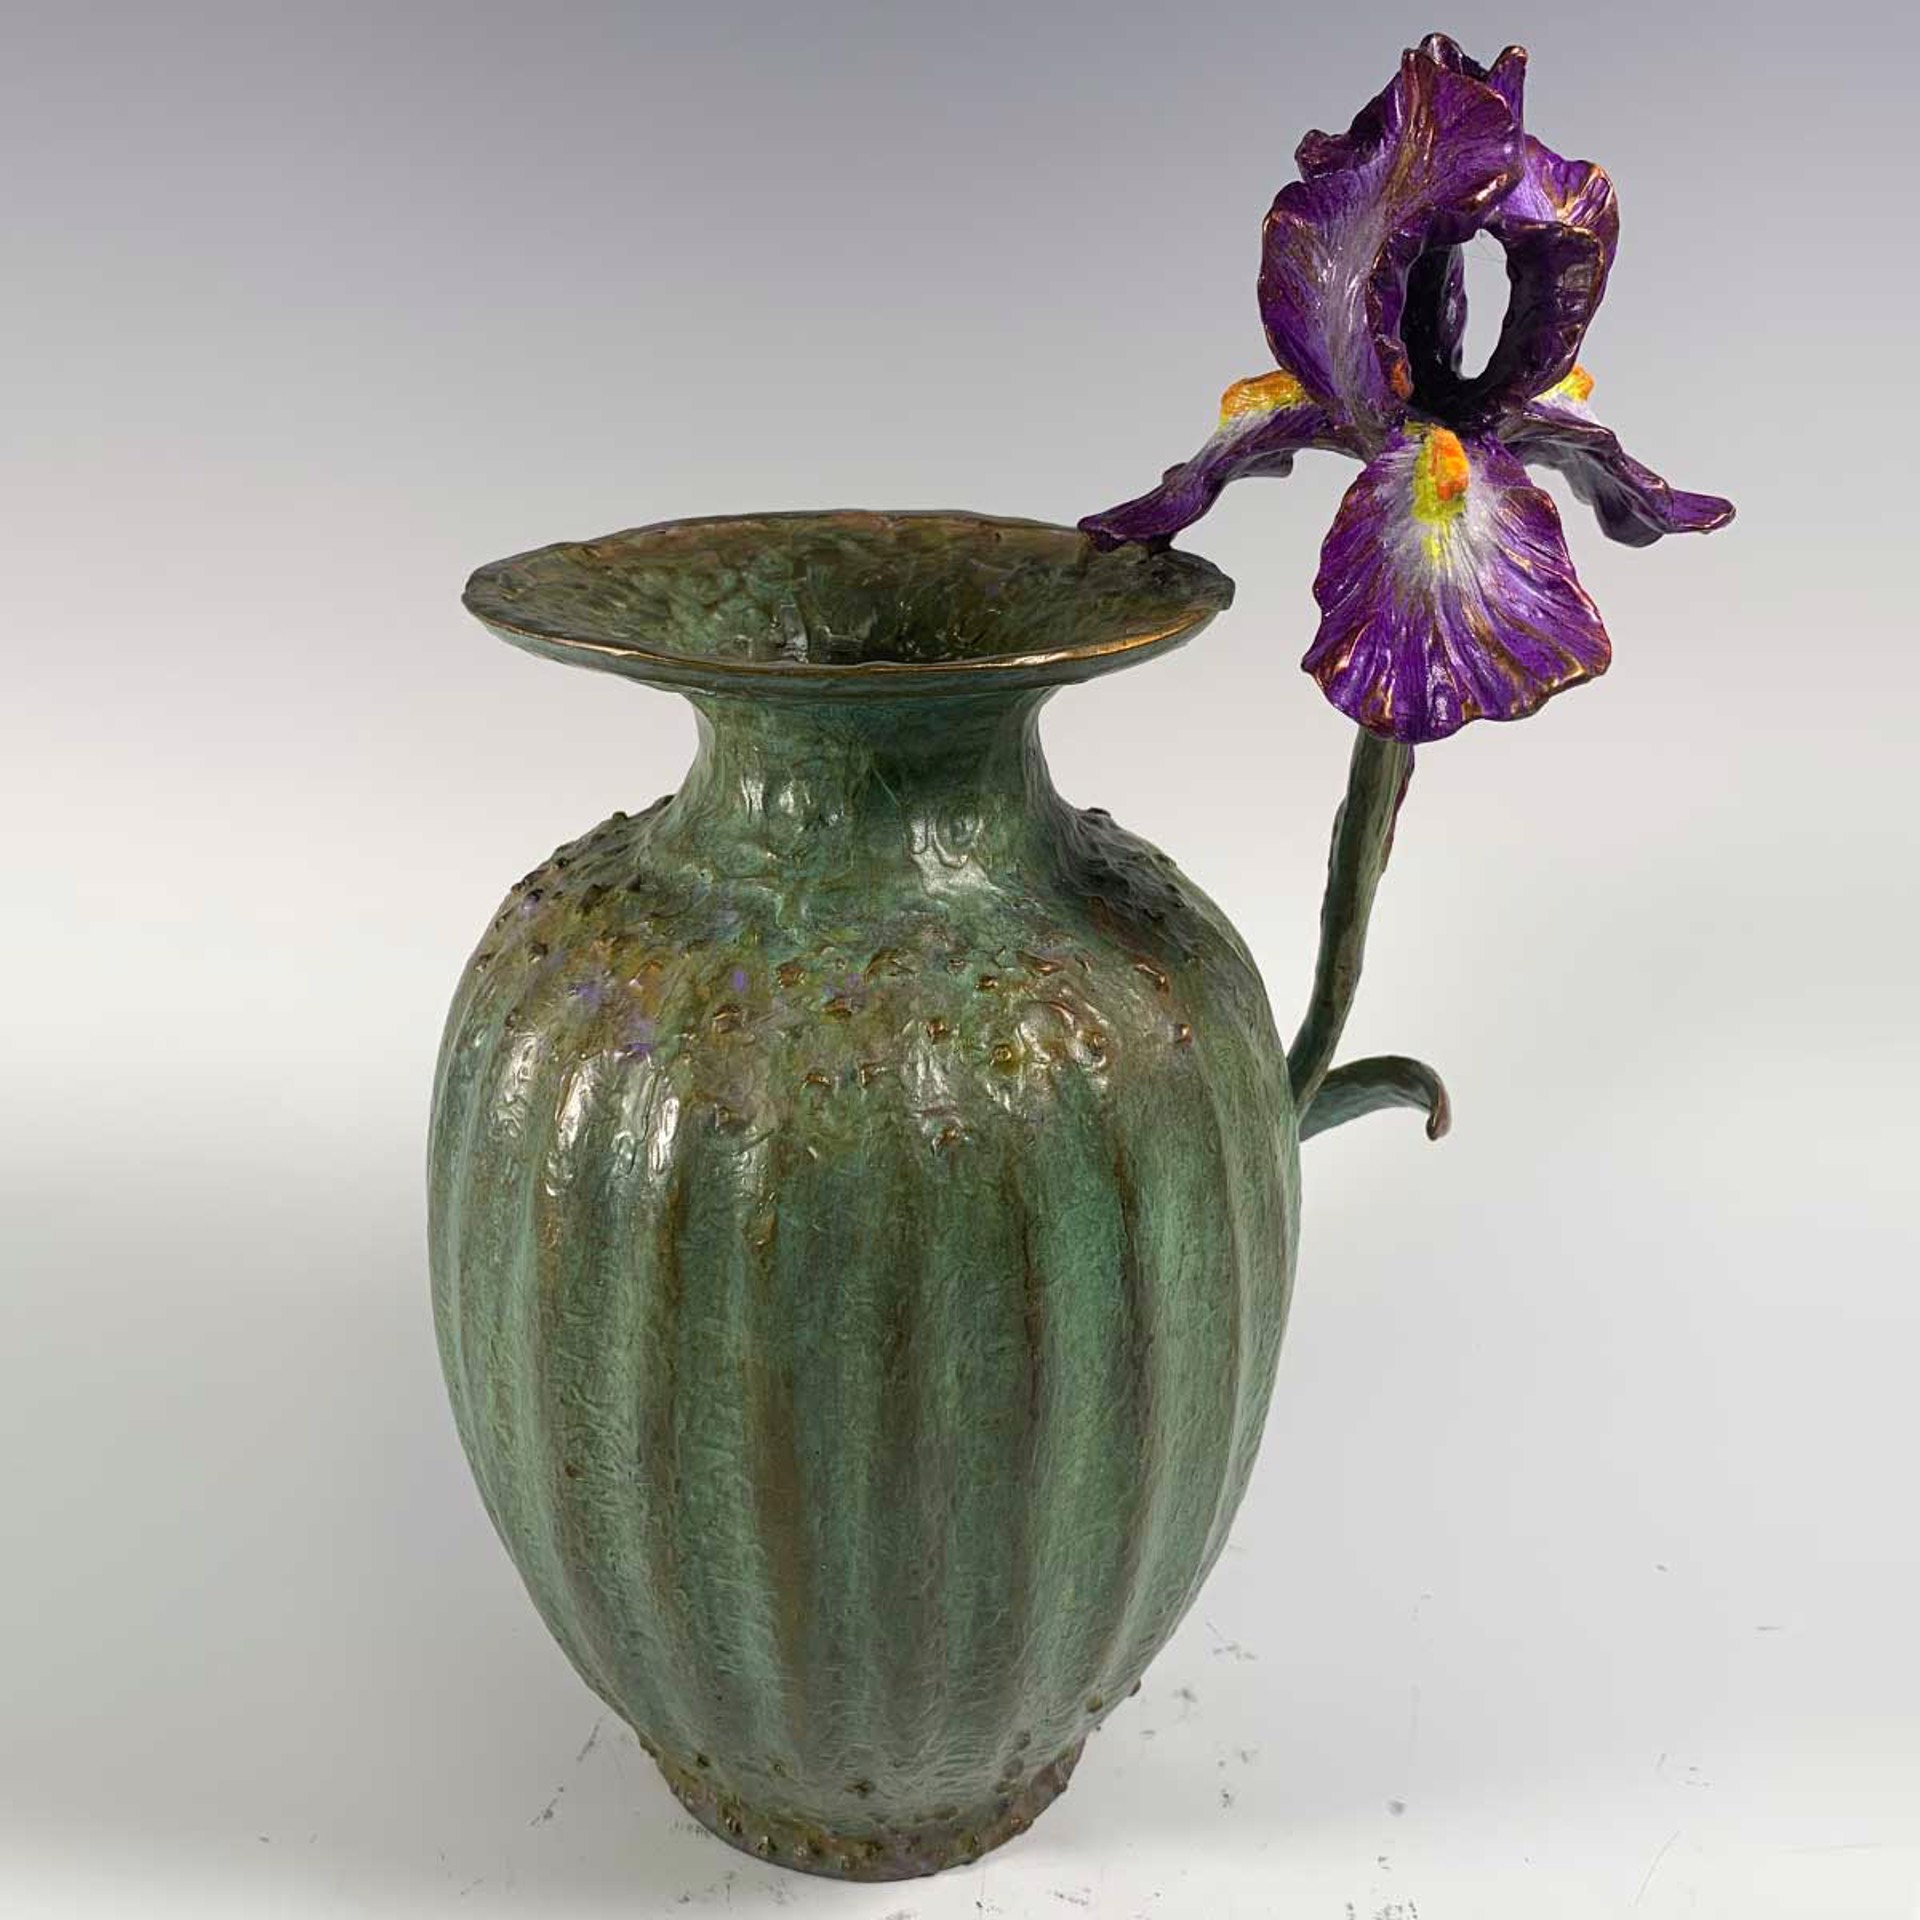 Green Poppy Seed Vase with Purple Iris by Sharles